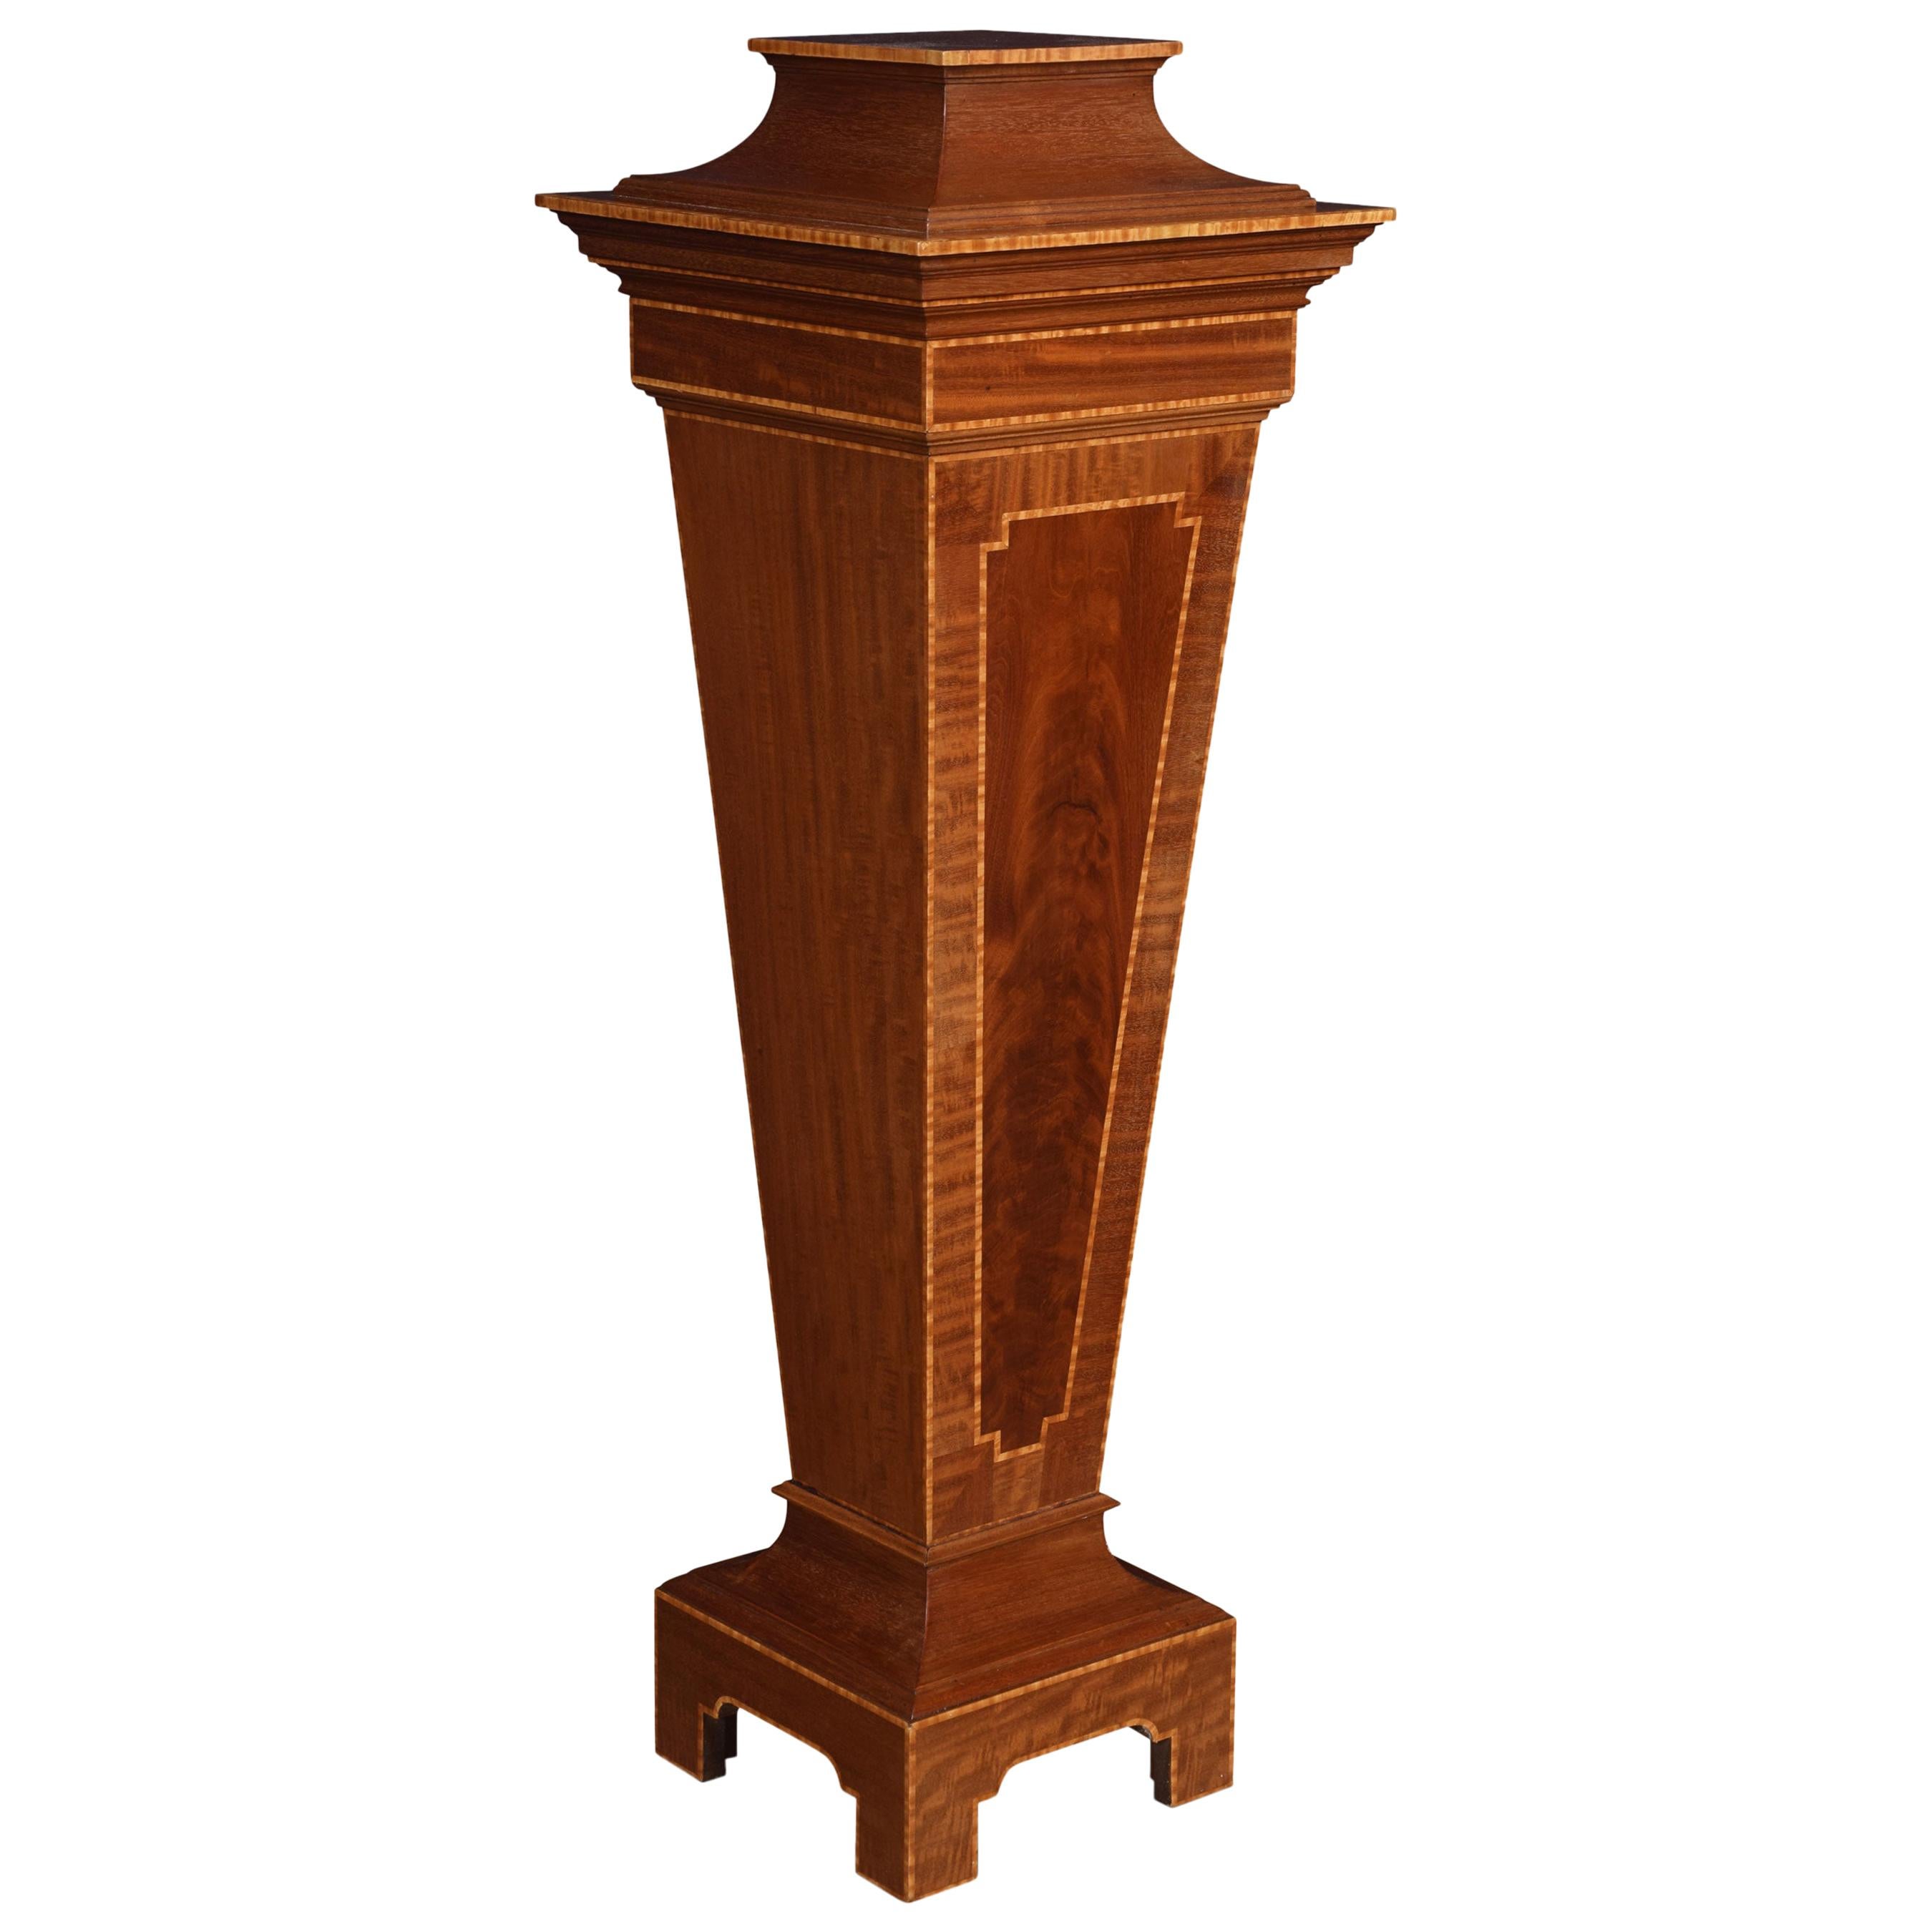 Mahogany Pedestal Torchiere Stand